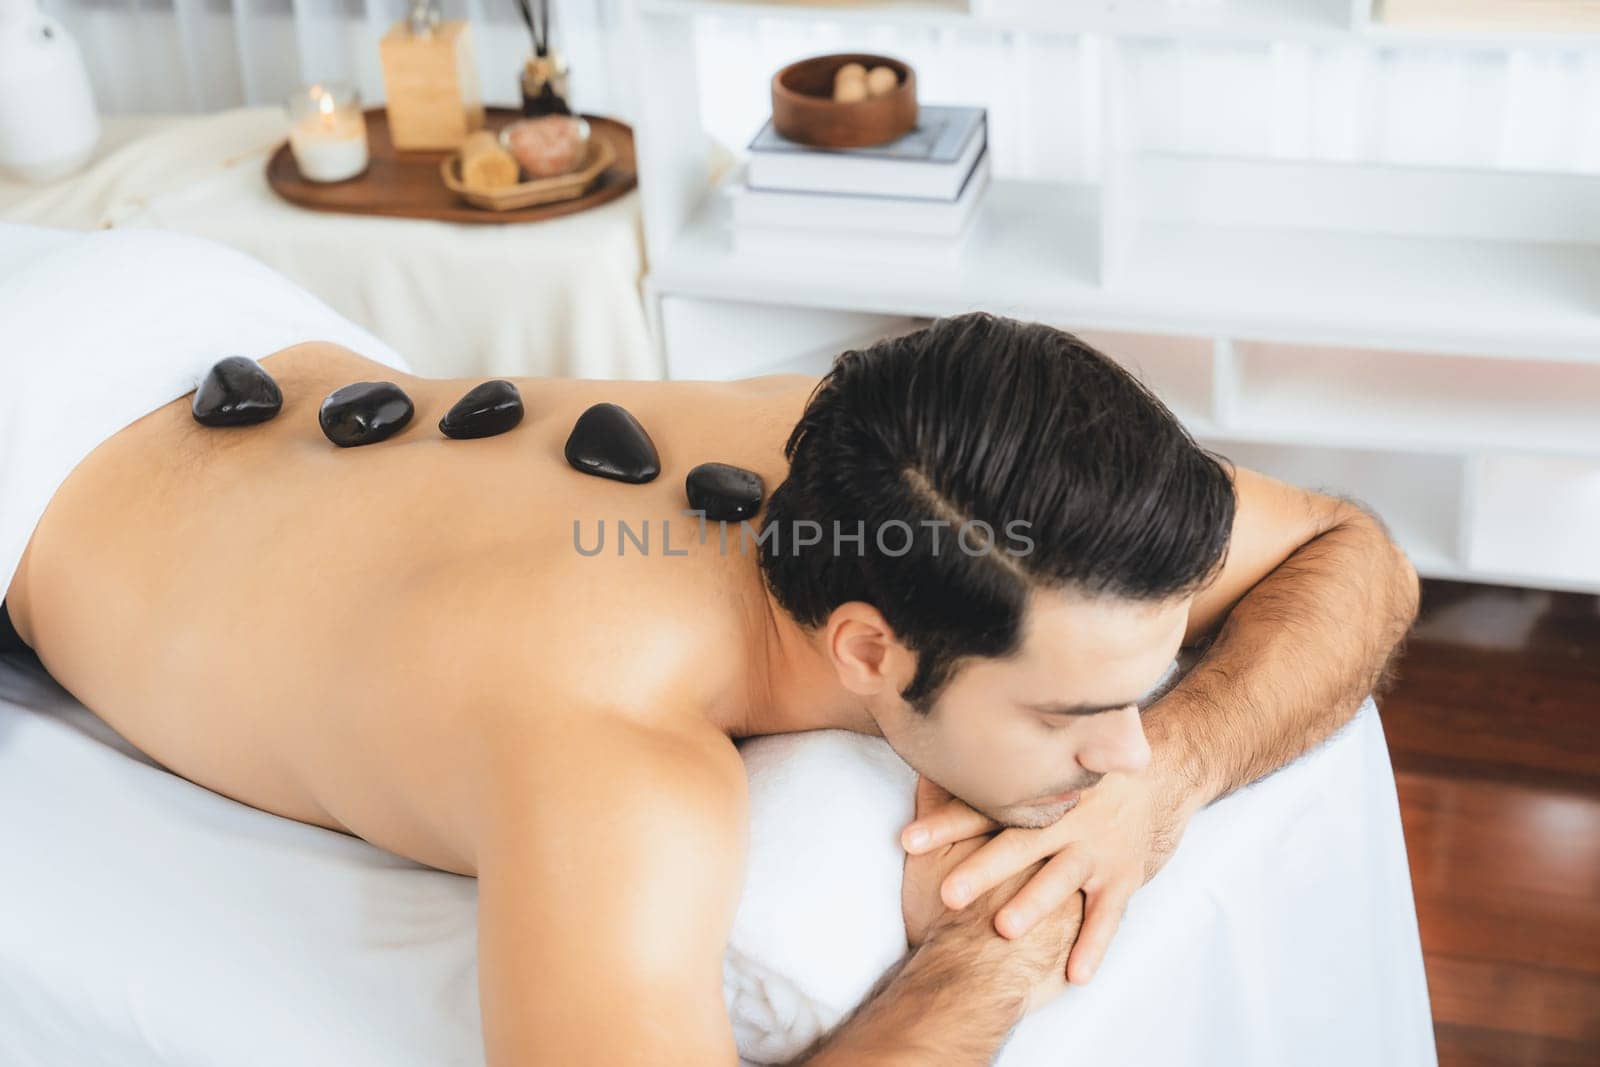 Hot stone massage at spa salon in luxury resort with day light serenity ambient, blissful man customer enjoying spa basalt stone massage glide over body with soothing warmth. Quiescent